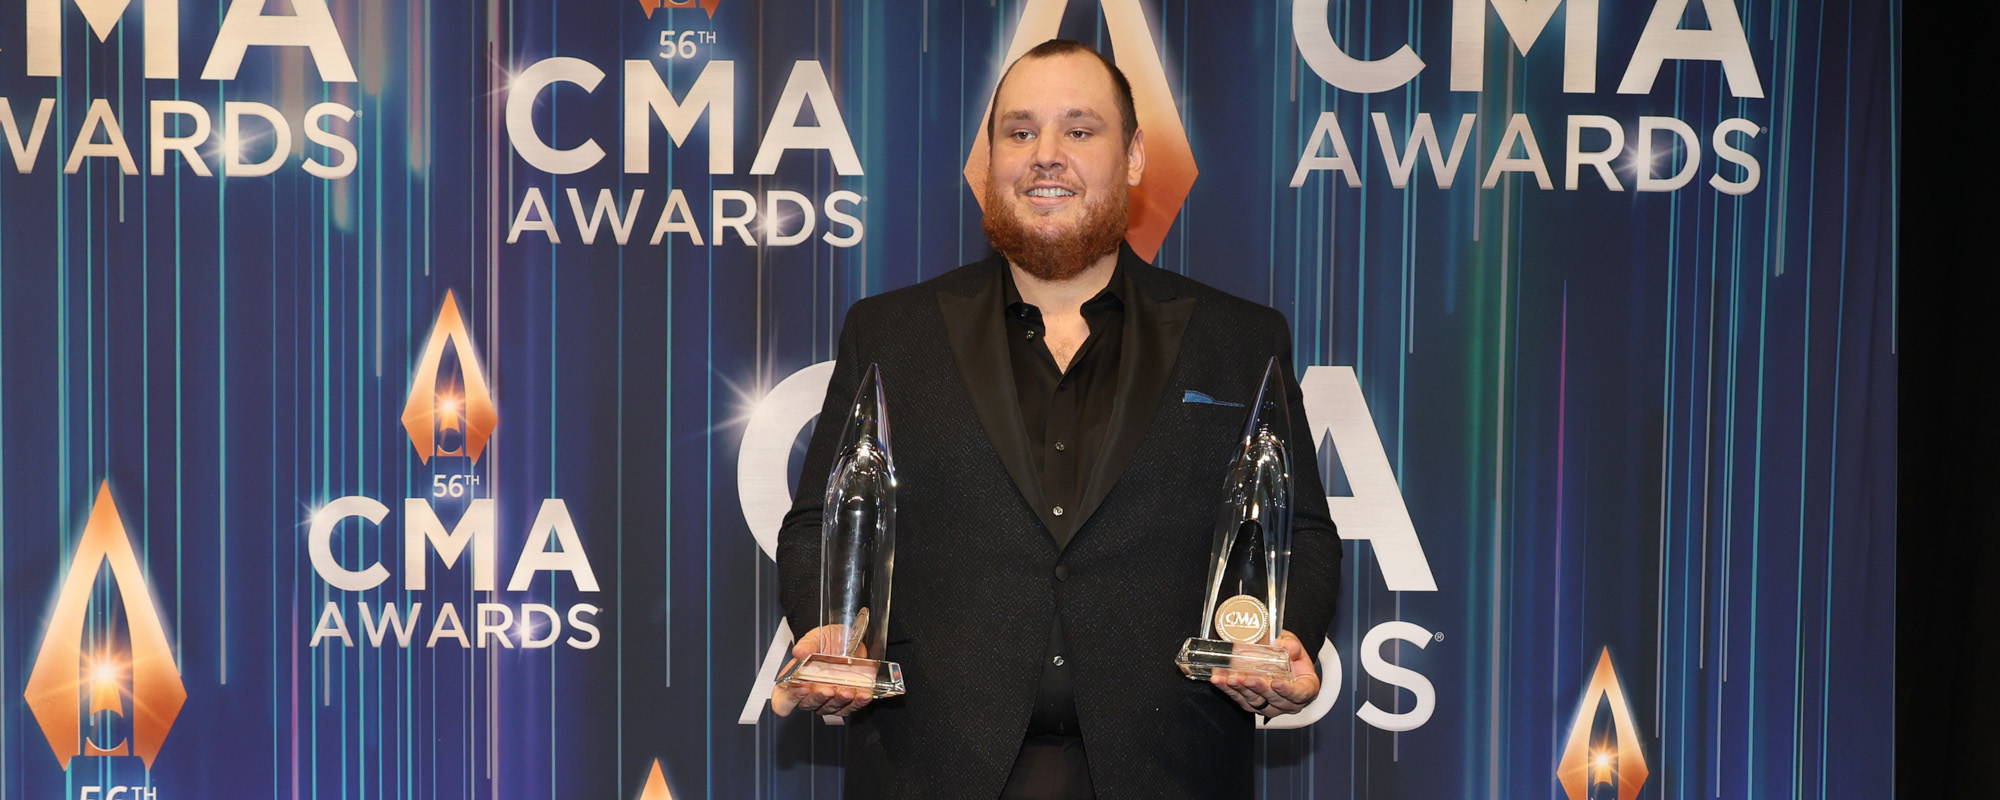 Luke Combs Wins Entertainer of the Year, Album of the Year at CMAs